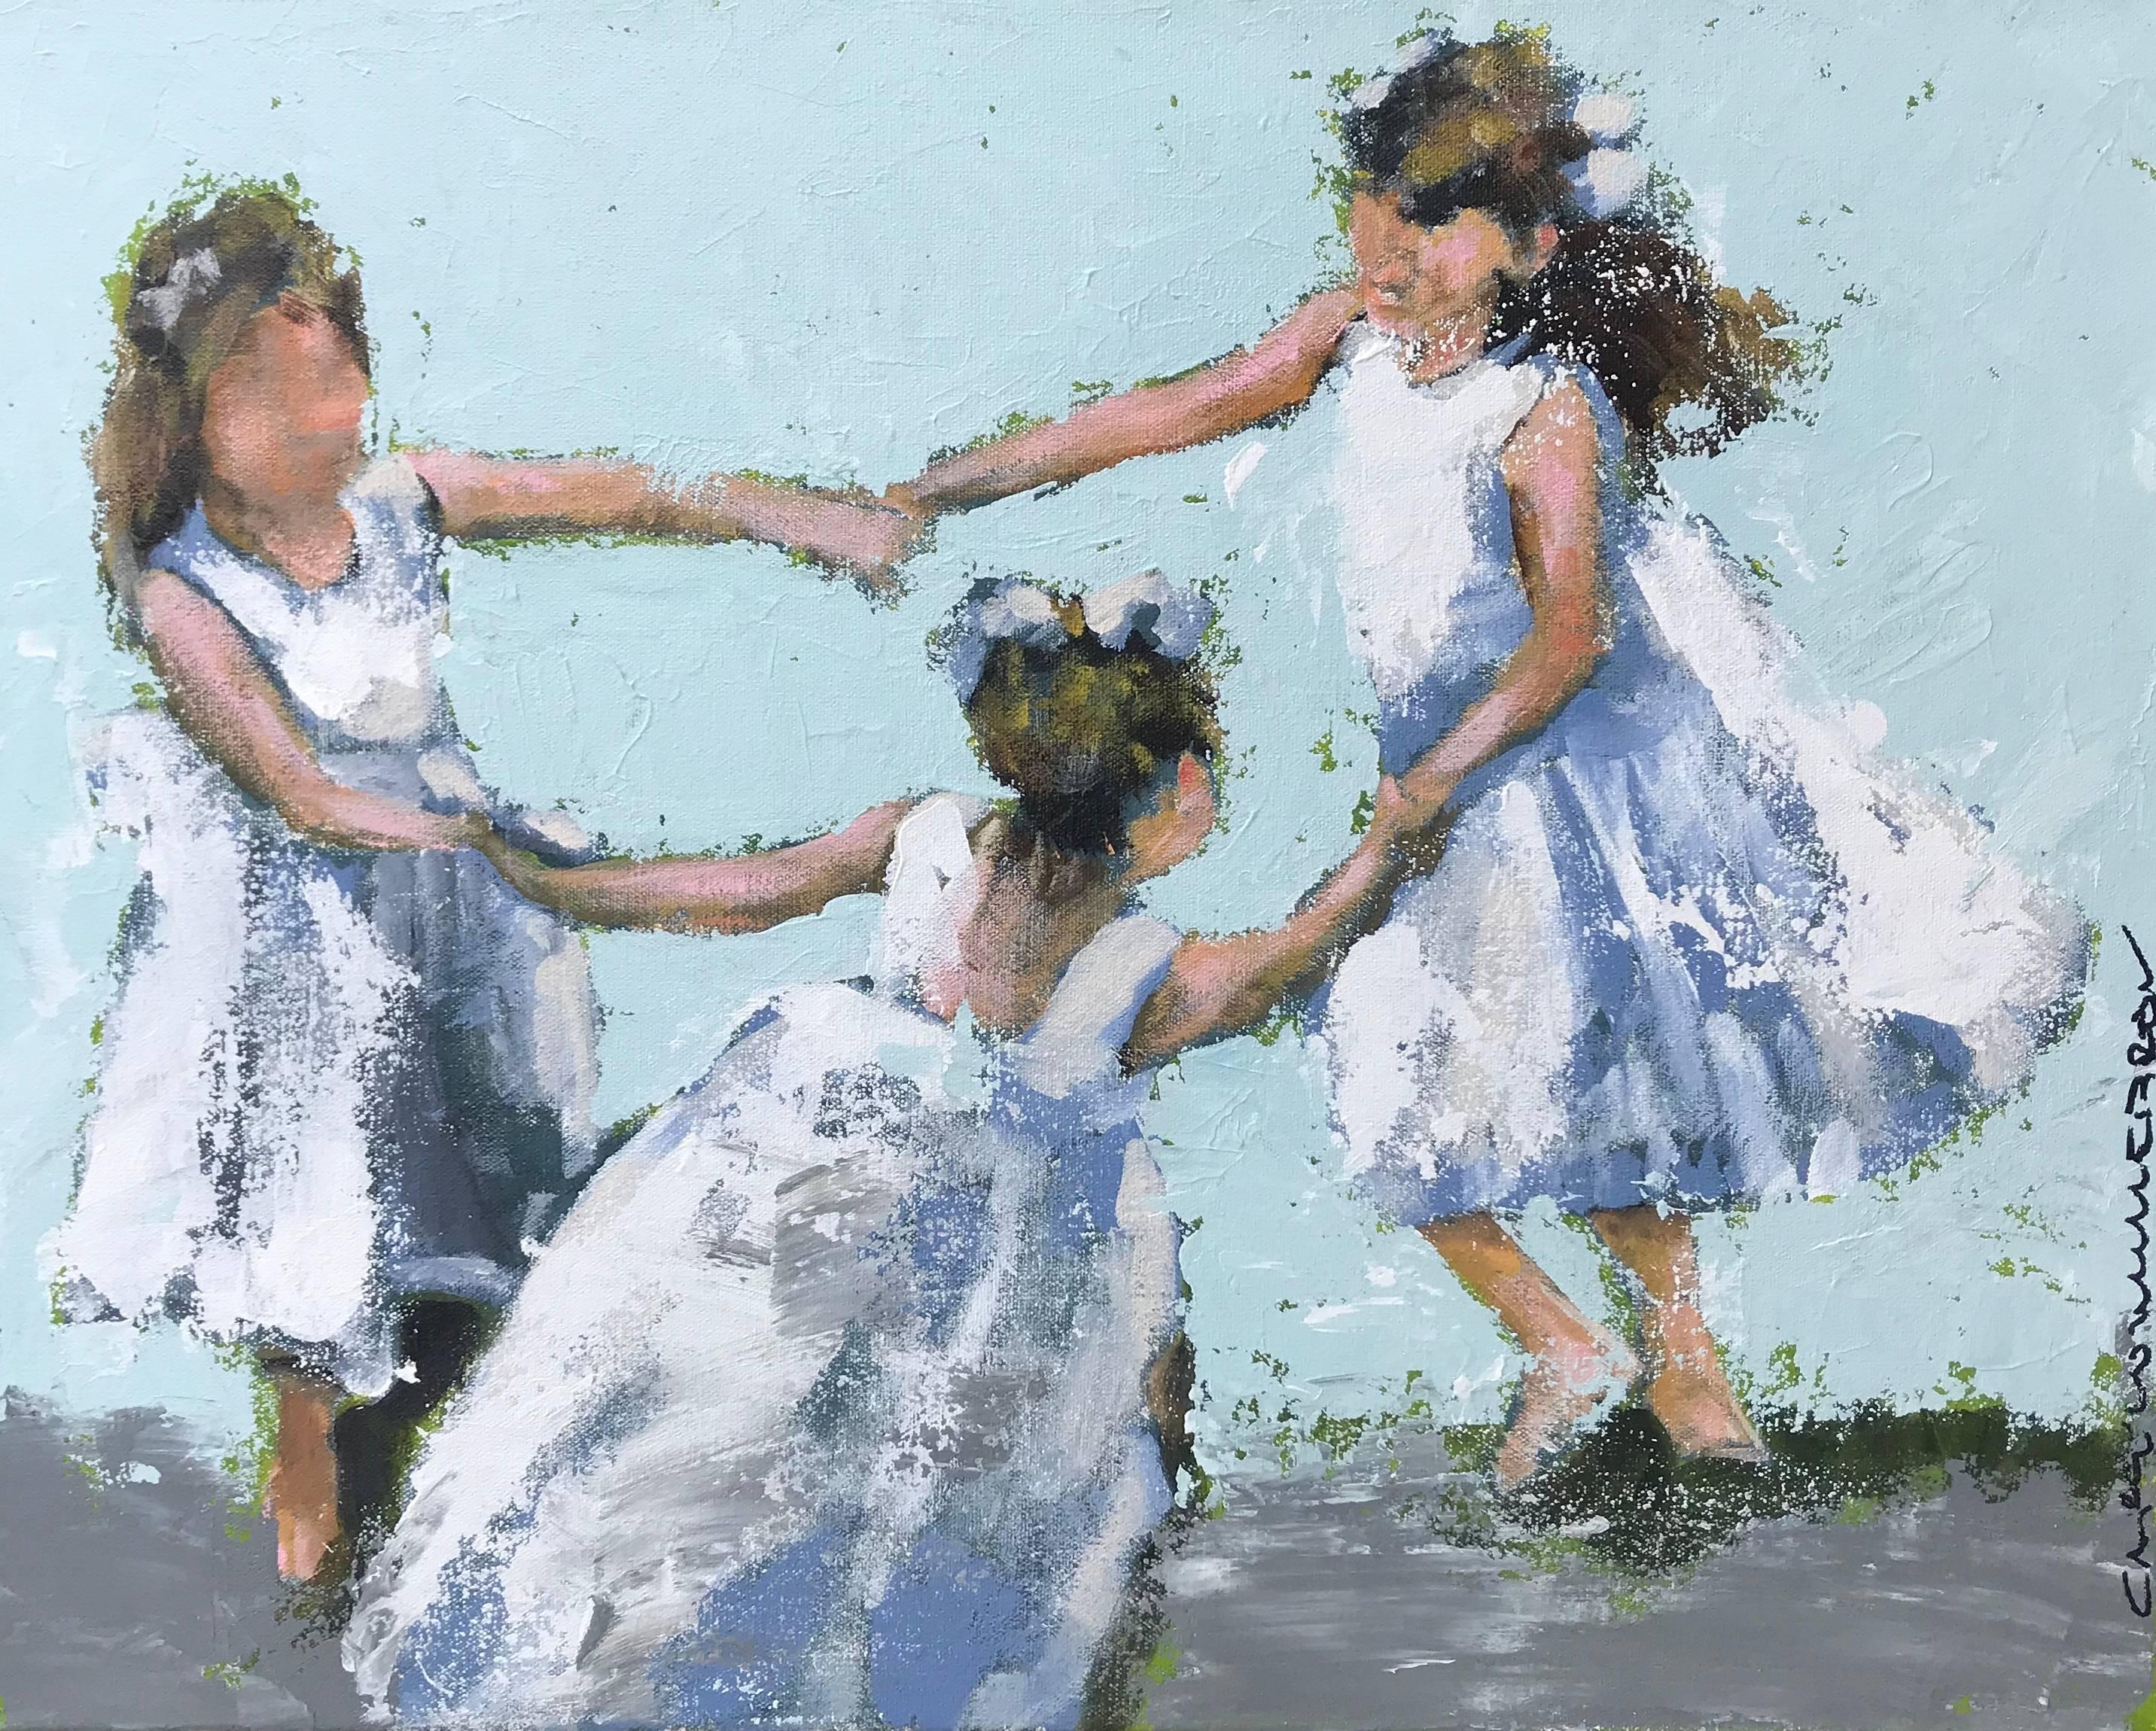 Carylon Killebrew Figurative Painting - 'Let the Games Begin', Impressionist Figurative Mixed Media on Canvas Painting